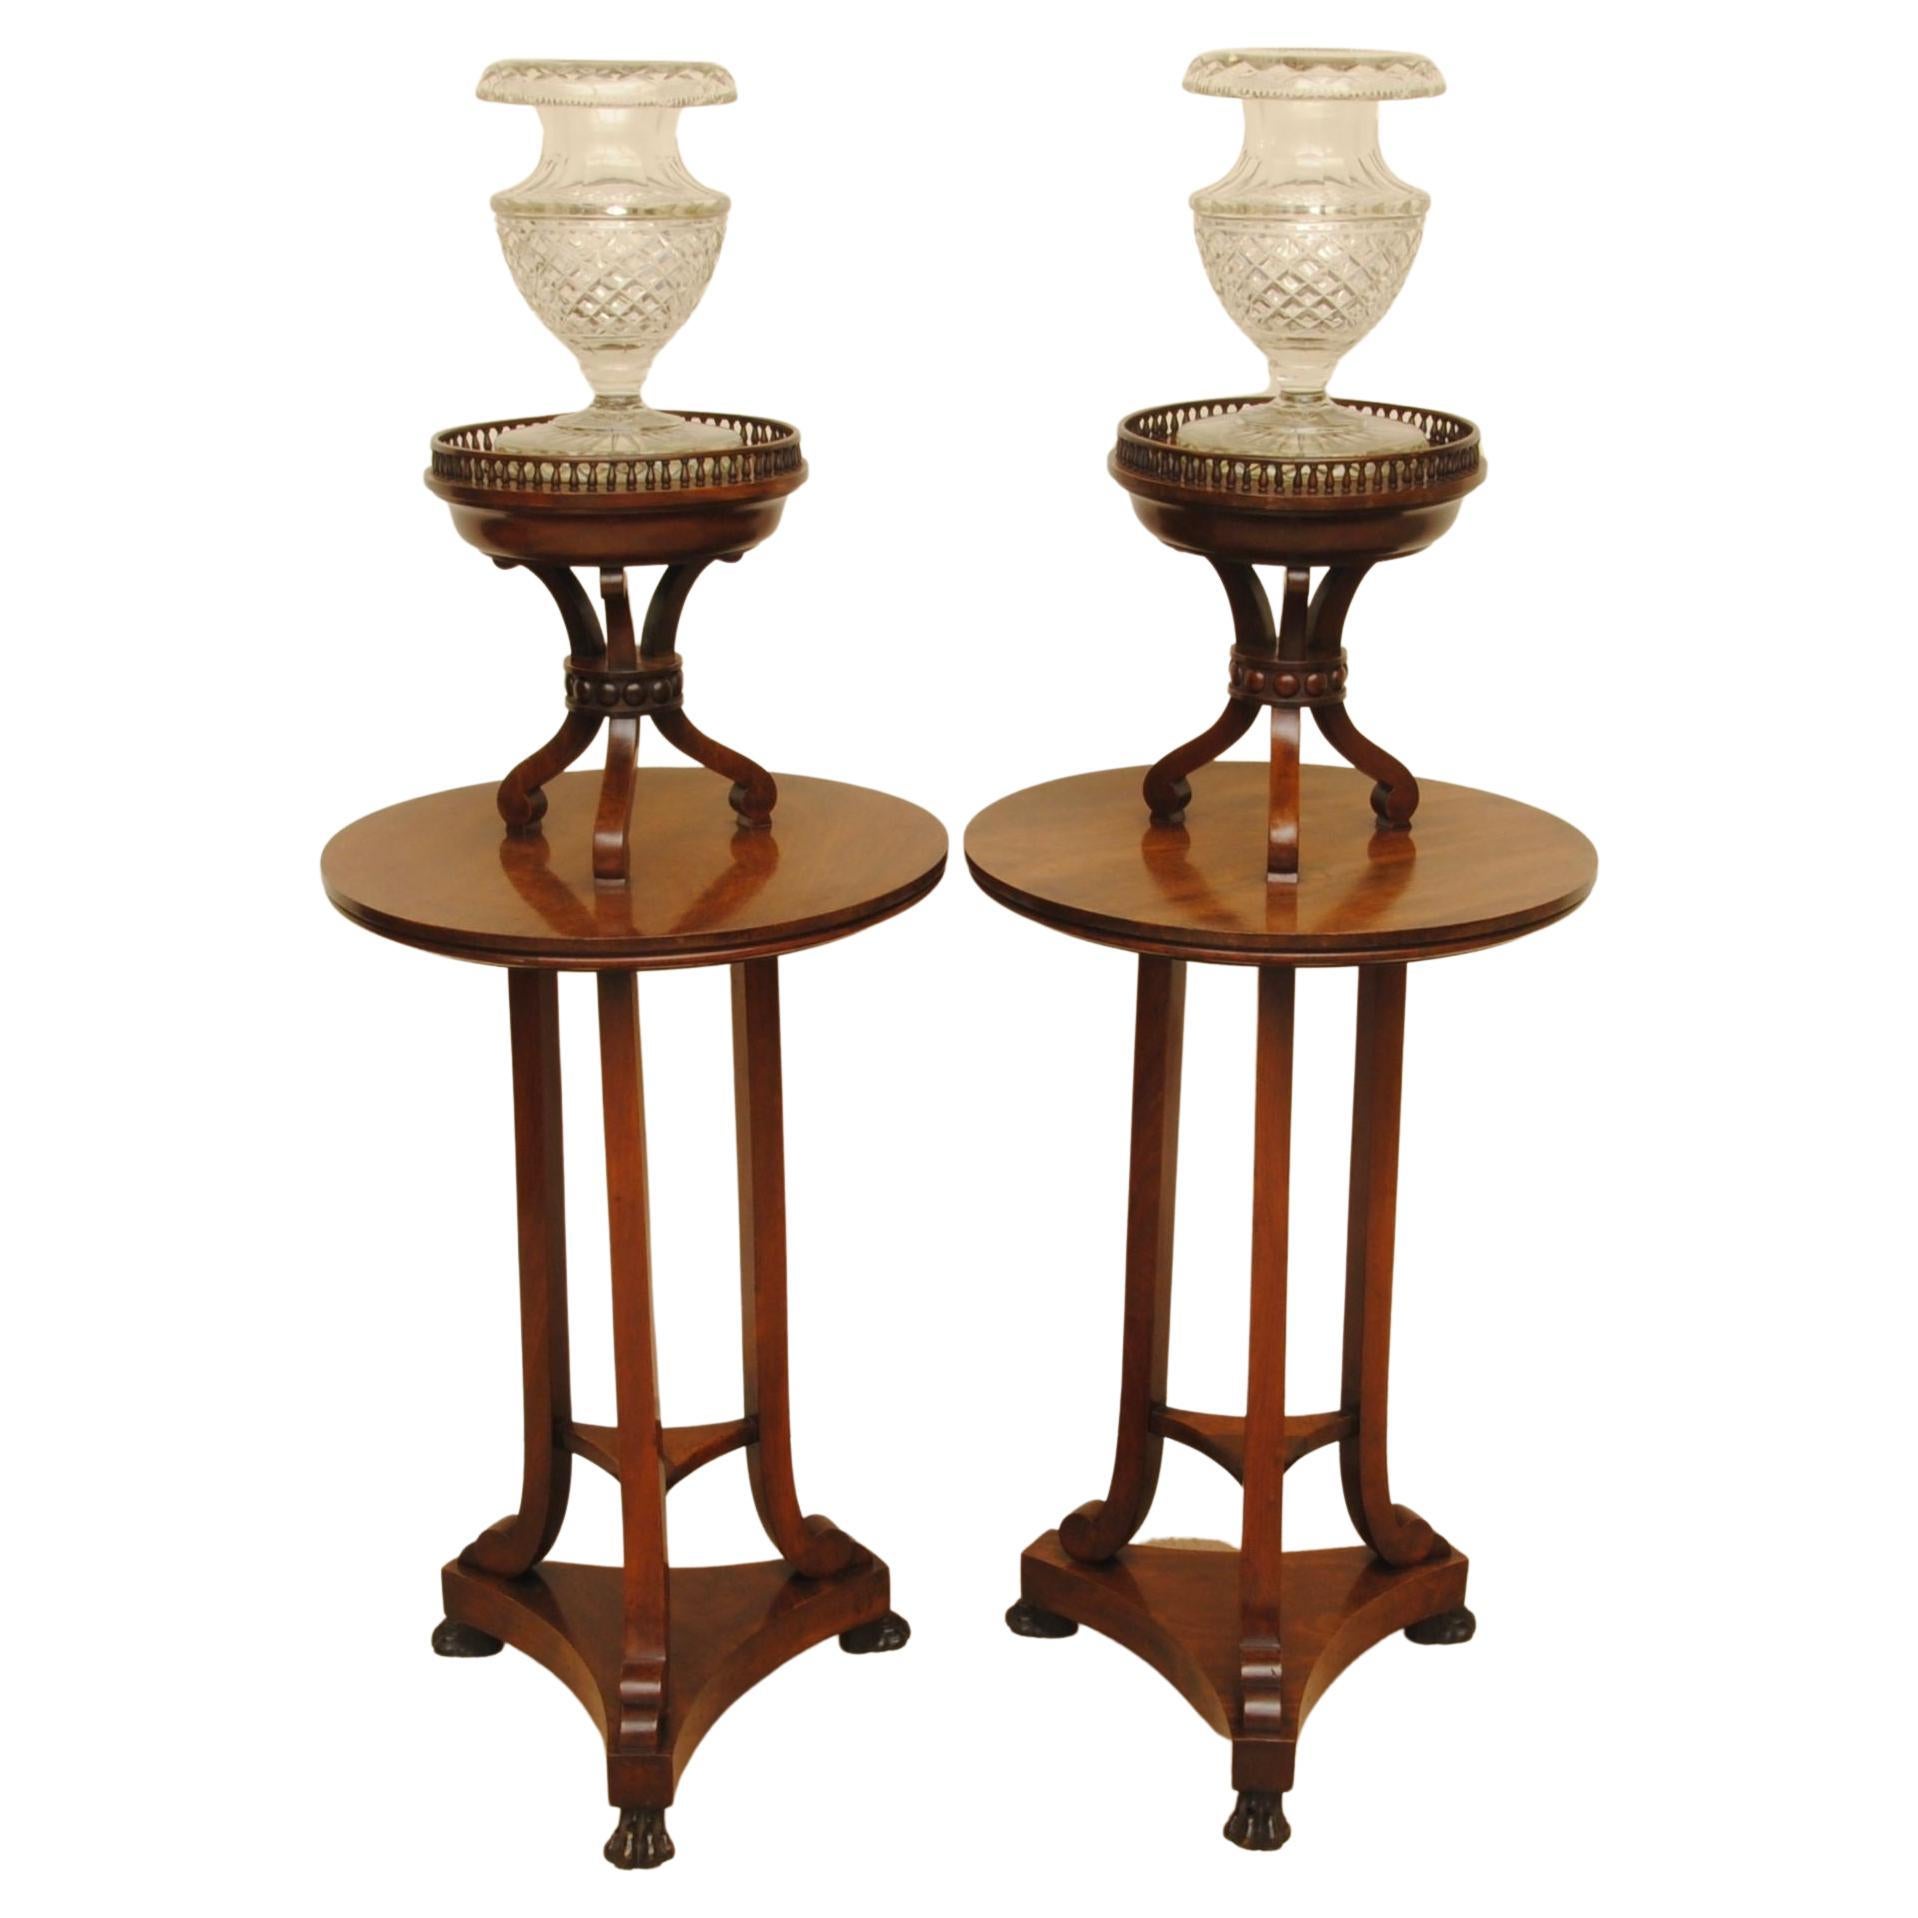 Unusual and Smart Pair of Regency Mahogany Stands